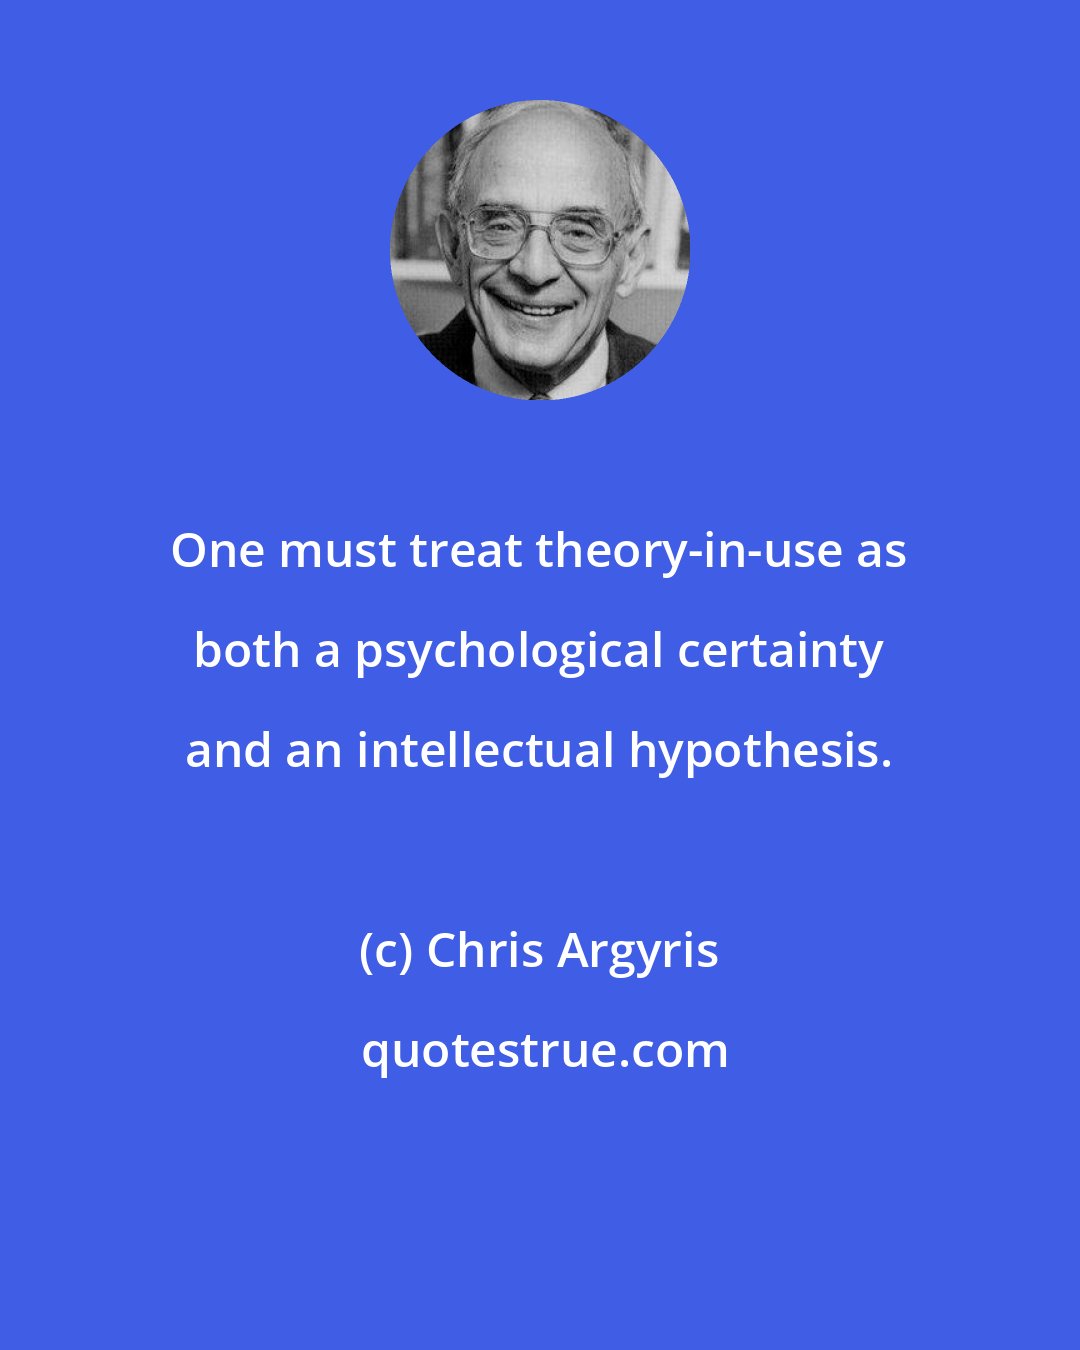 Chris Argyris: One must treat theory-in-use as both a psychological certainty and an intellectual hypothesis.